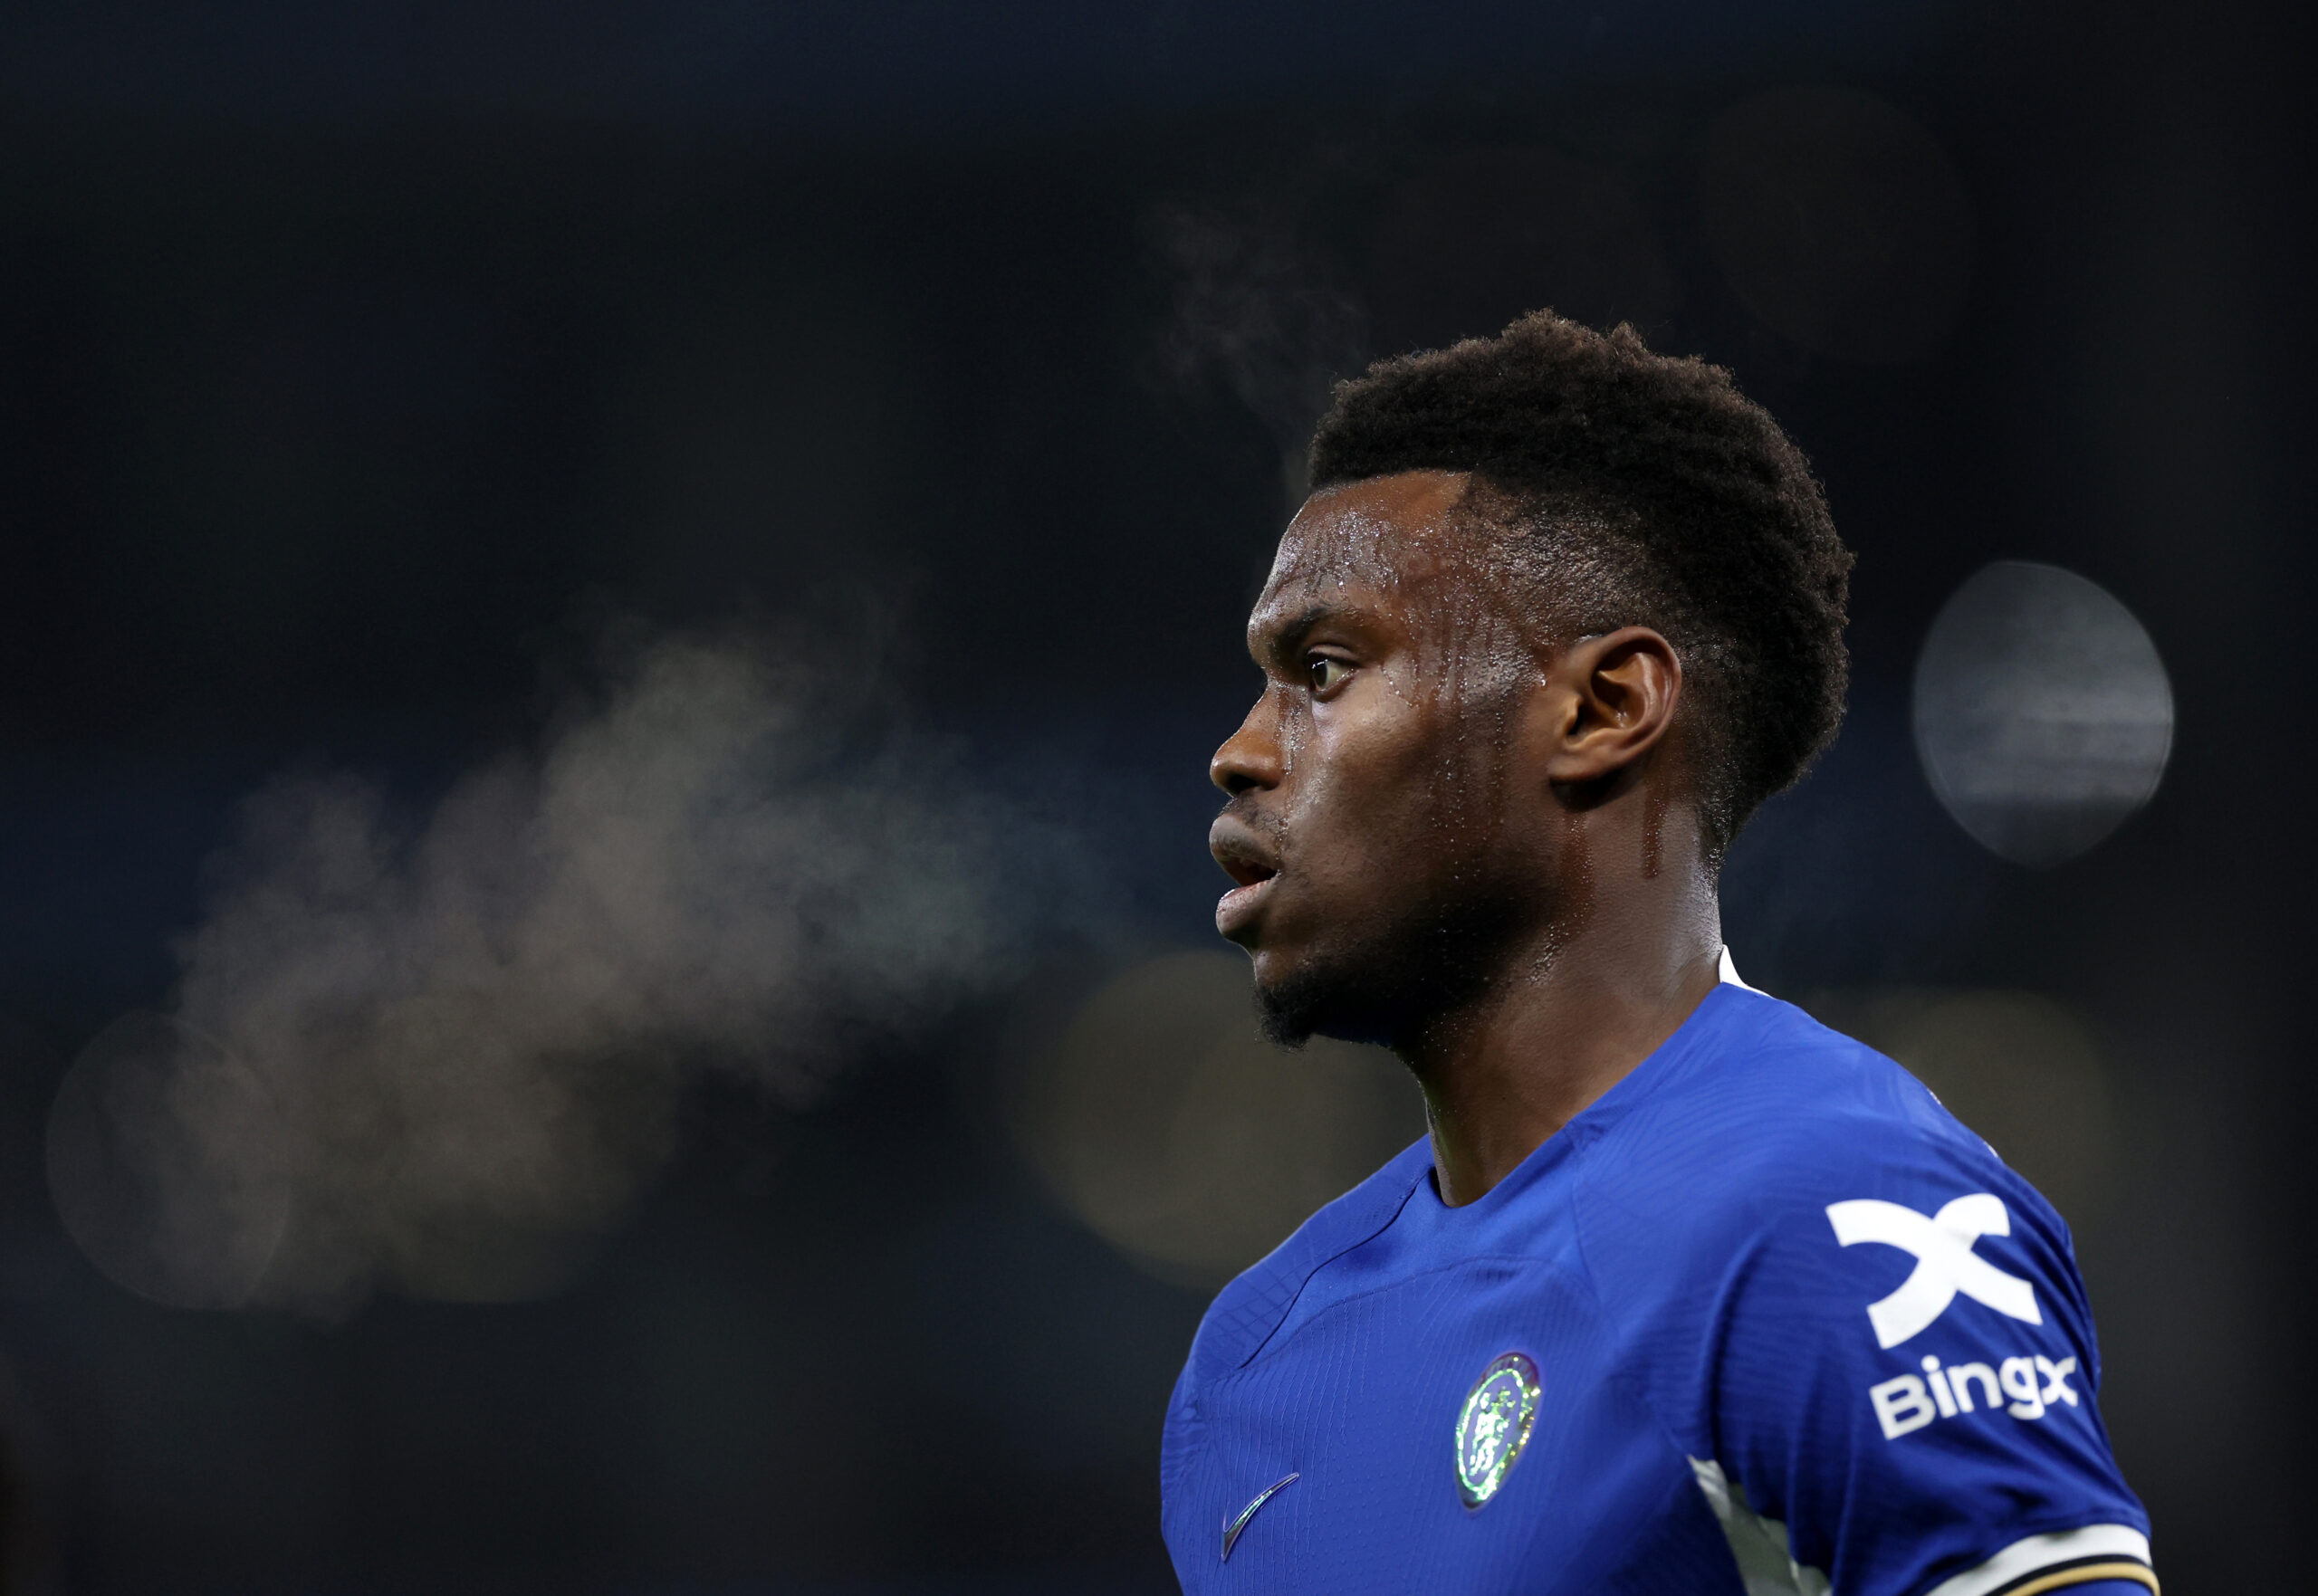 Milan are searching for a new center-back and striker and could revisit two of their old targets, Chelsea’s Benoit Badiashile and Lille’s Jonathan David.